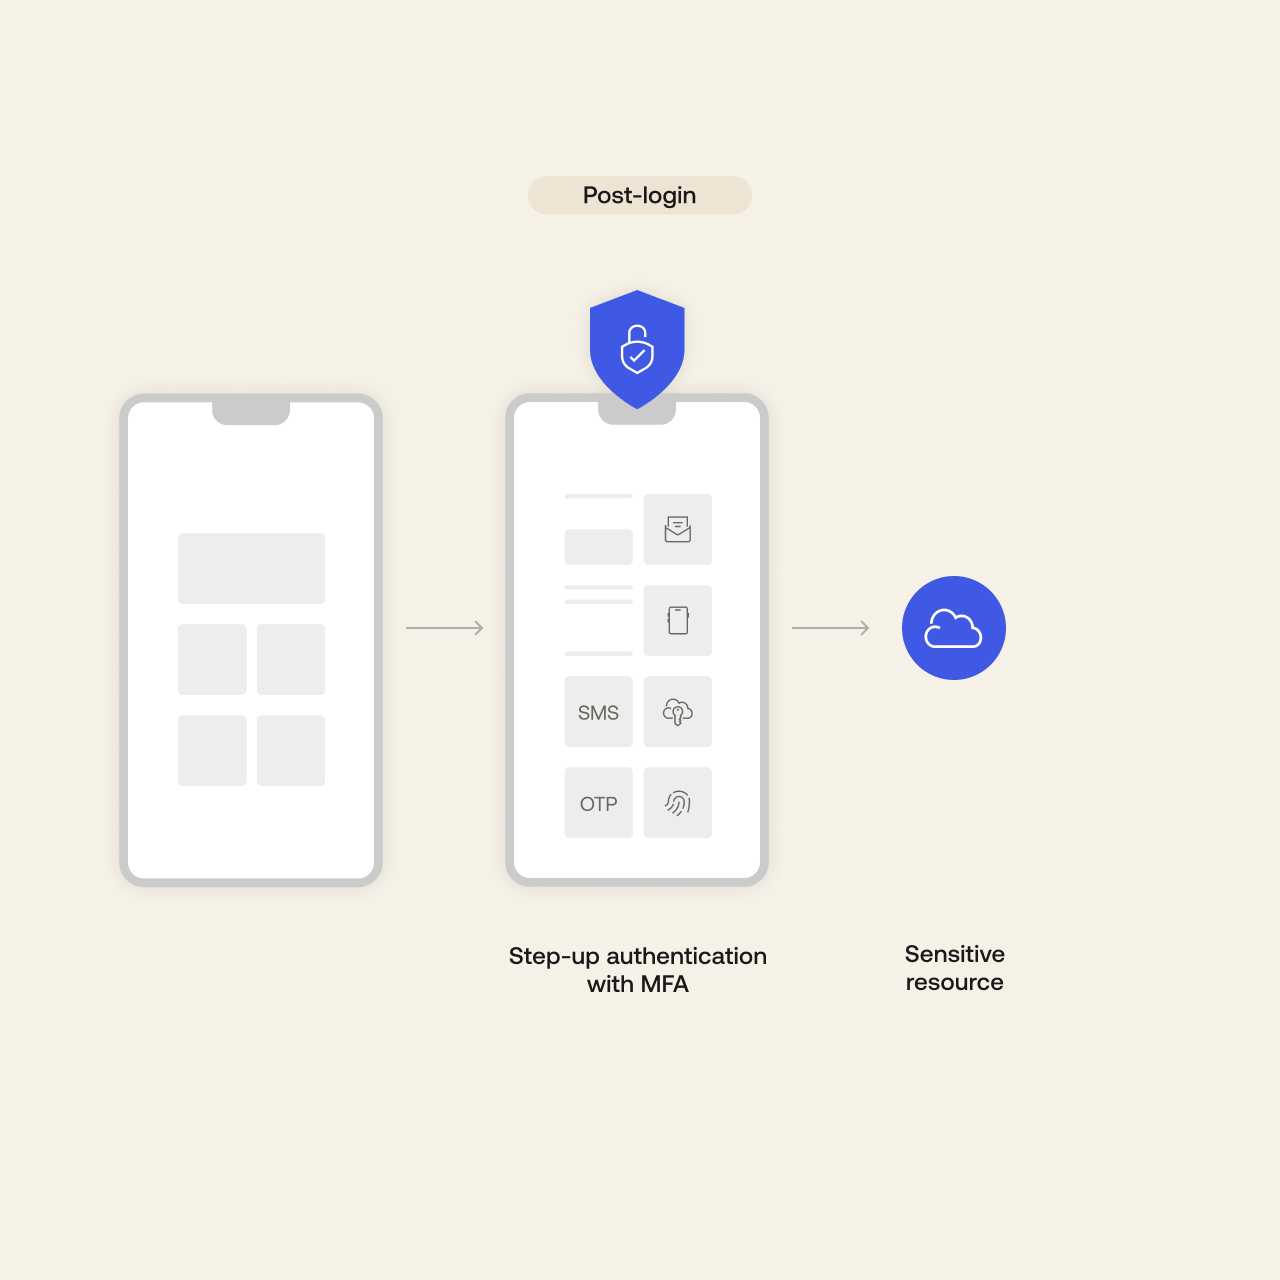 Mobile screens mocked-up with the post-login flow of step-up authentication allowing access to a sensitive resource